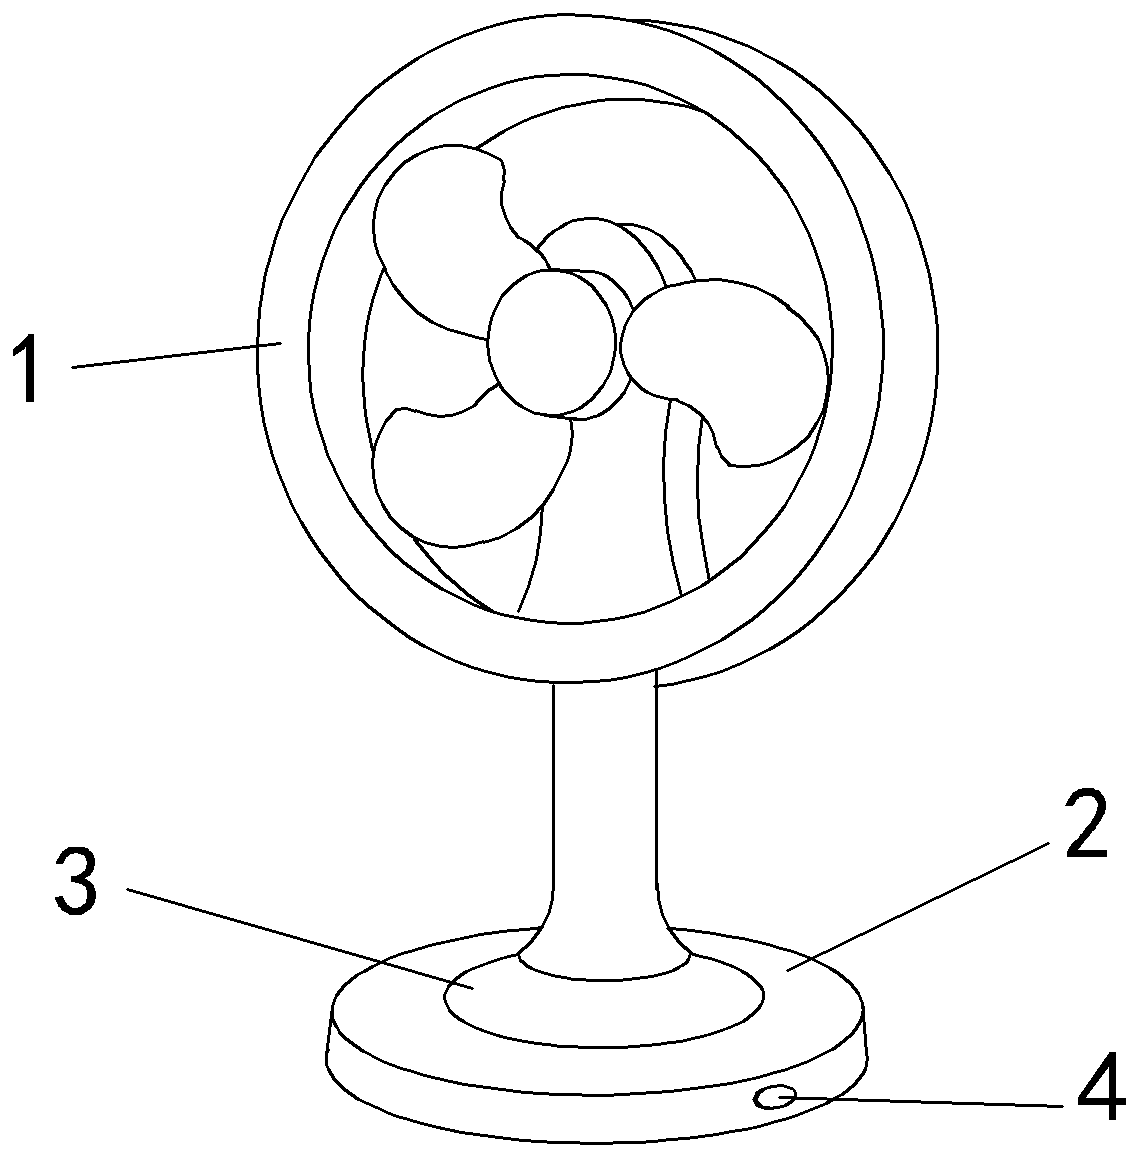 Small tabletop electric fan provided with lamp